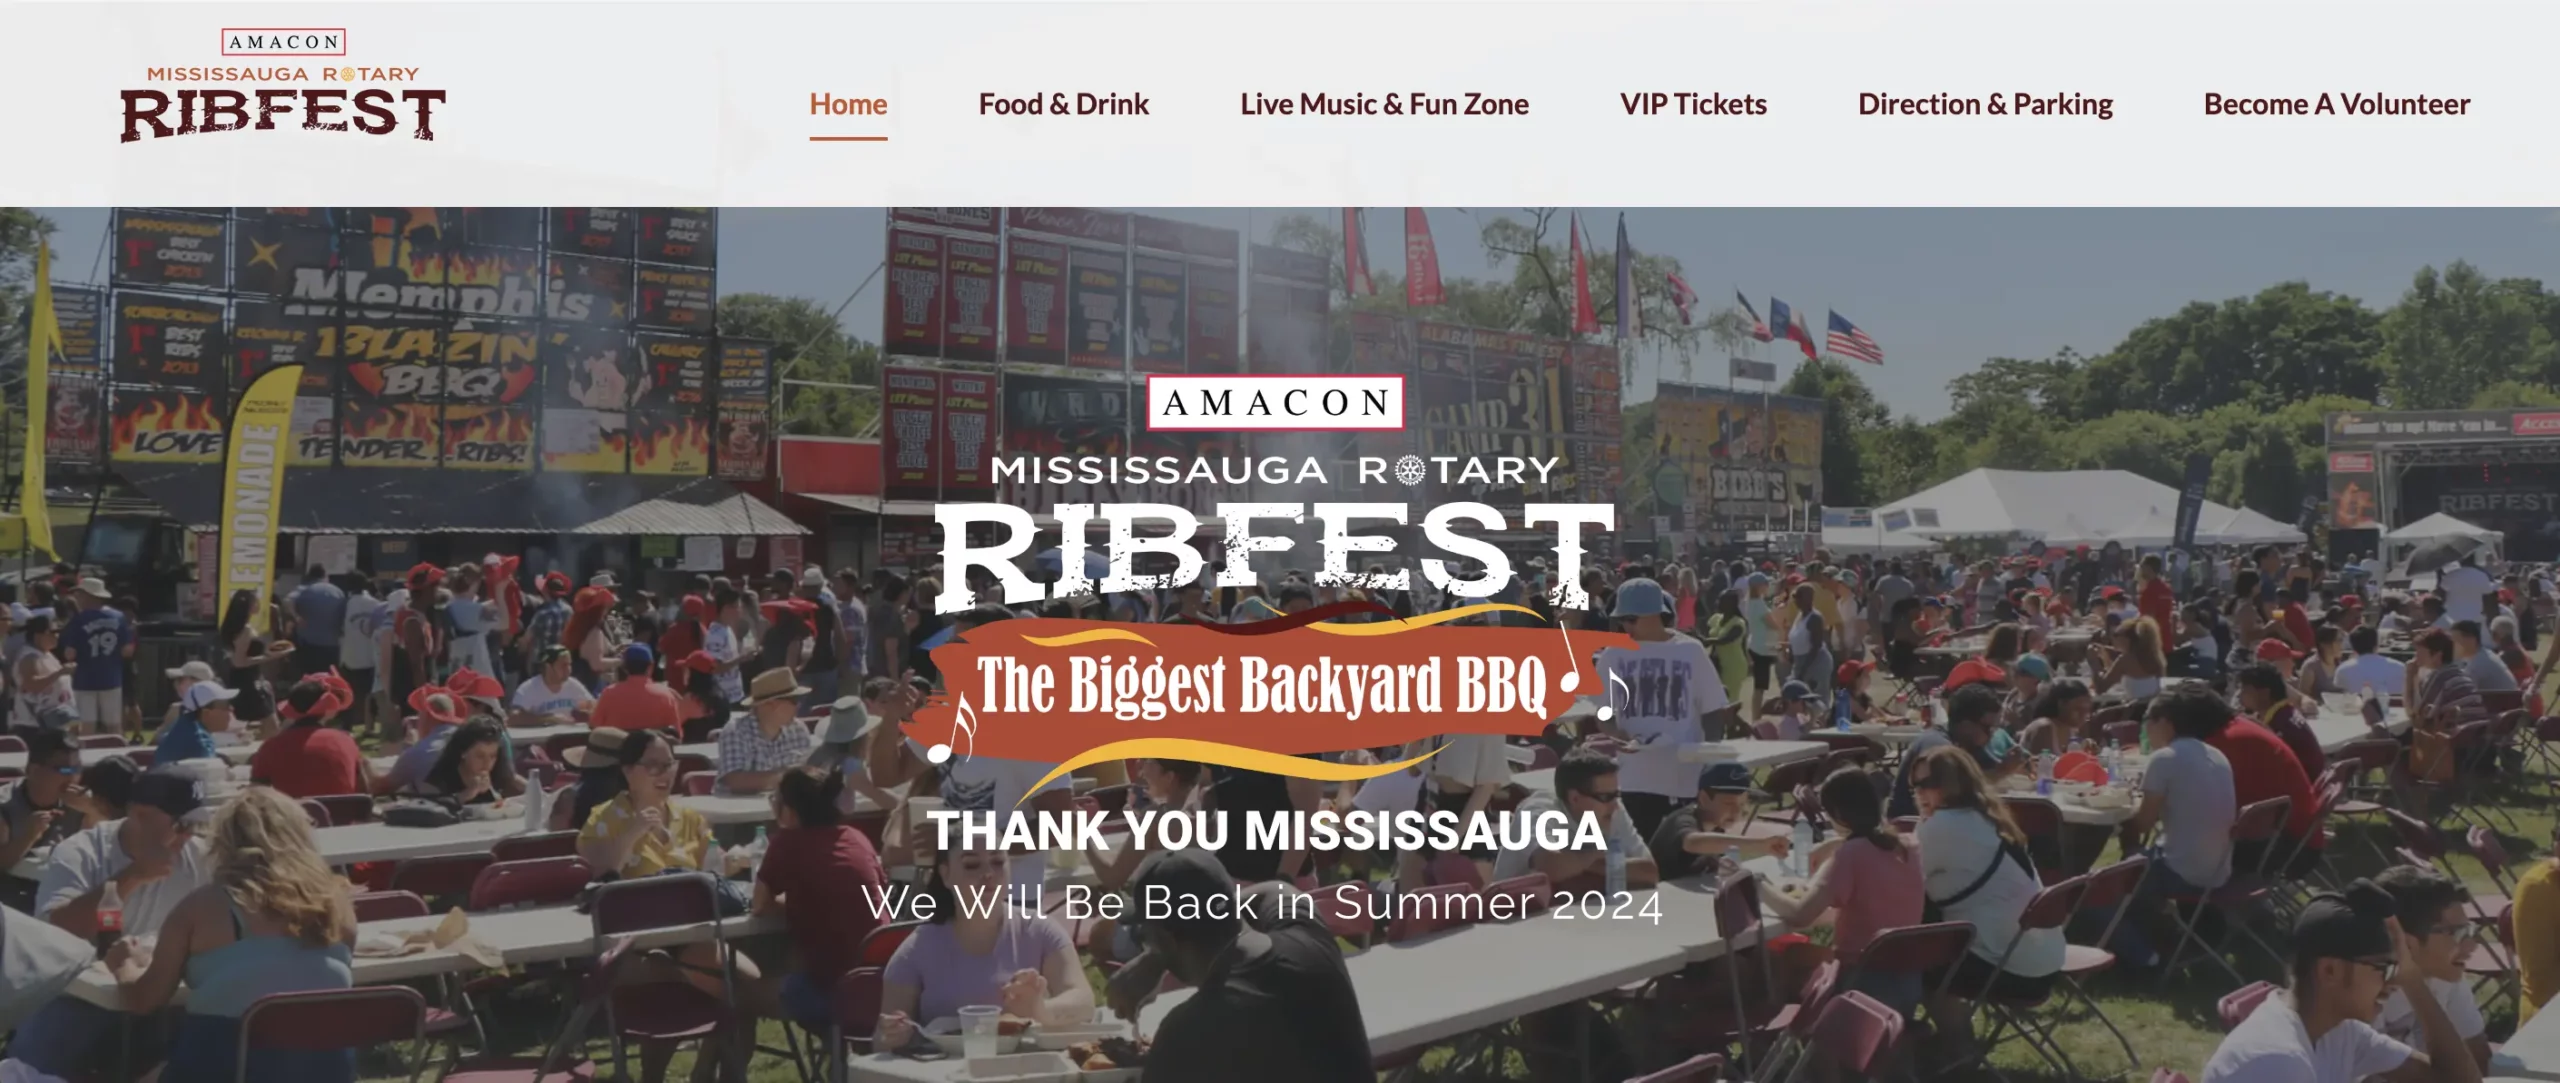 Case Study: Reviving Rotary Mississauga RibFest with Digital Marketing